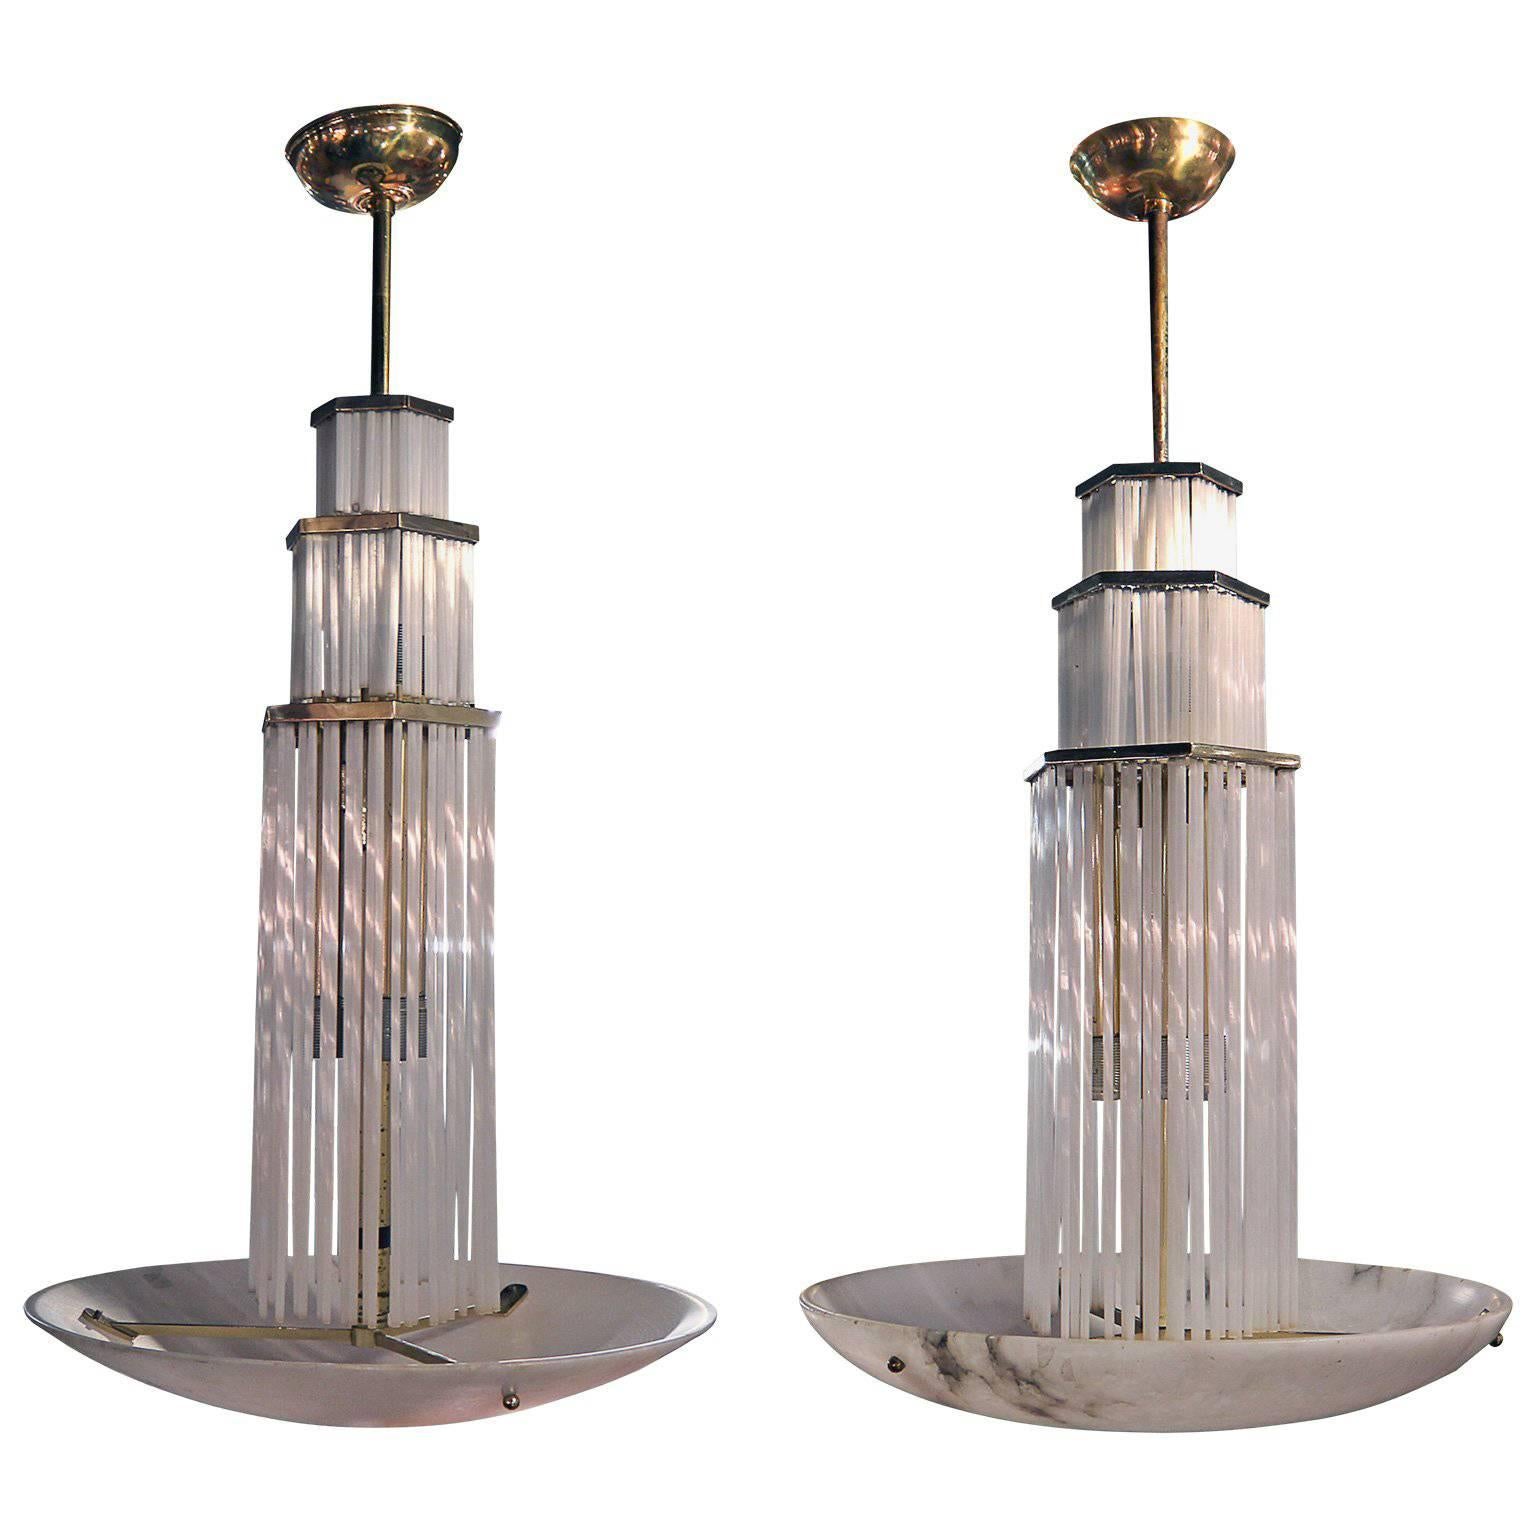 These two towered Art Deco beauties have three tiers with alabaster, glass rods which give of an amazing light patter look and glow beautifully. The marble base of the chandeliers has amazing wear and patina to add to it beauty and is connected by